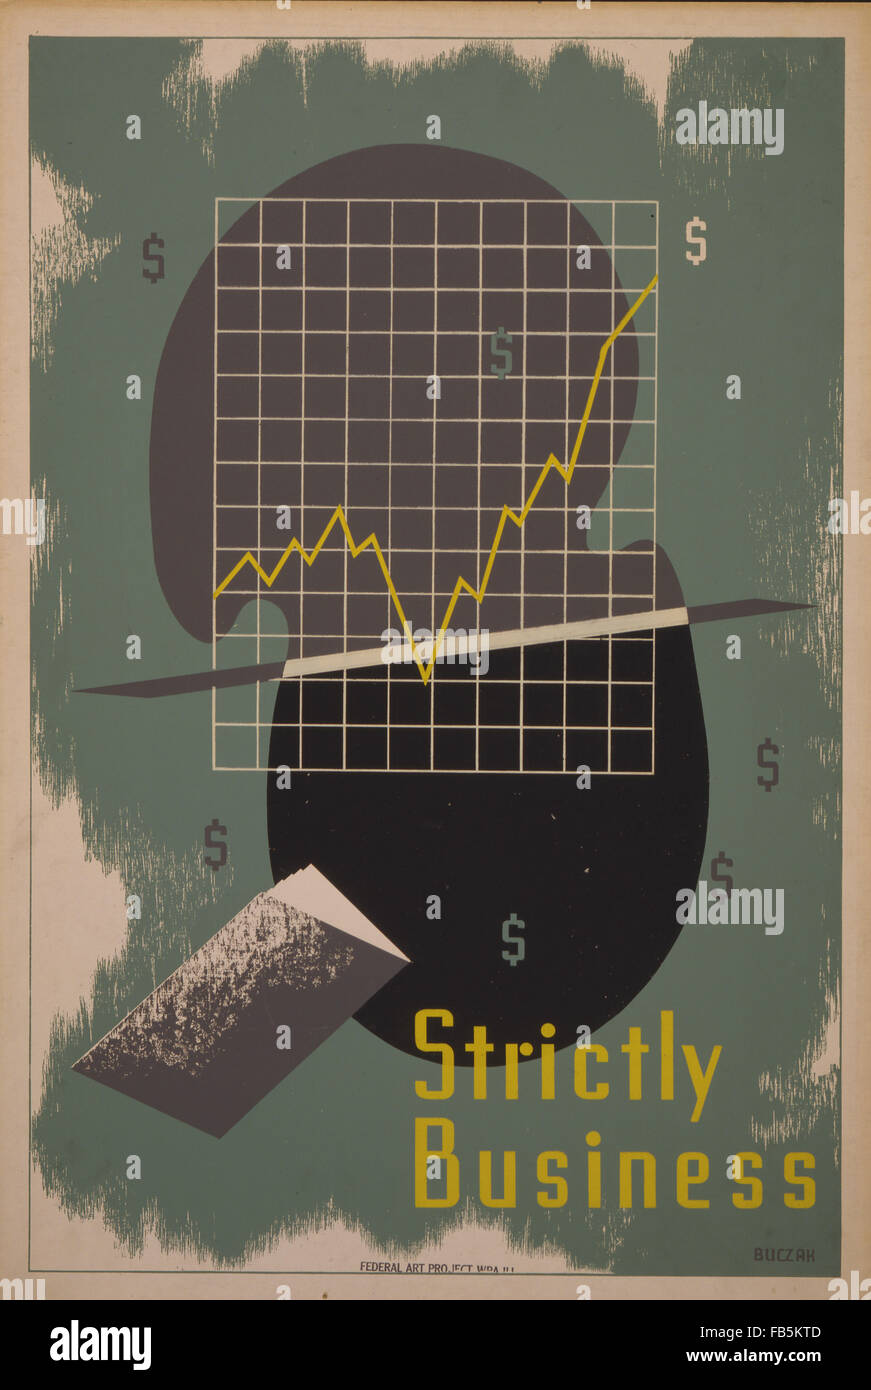 Business themed Work Projects Administration (WPA) poster produced between 1936 and 1943. (Library of Congress) Stock Photo